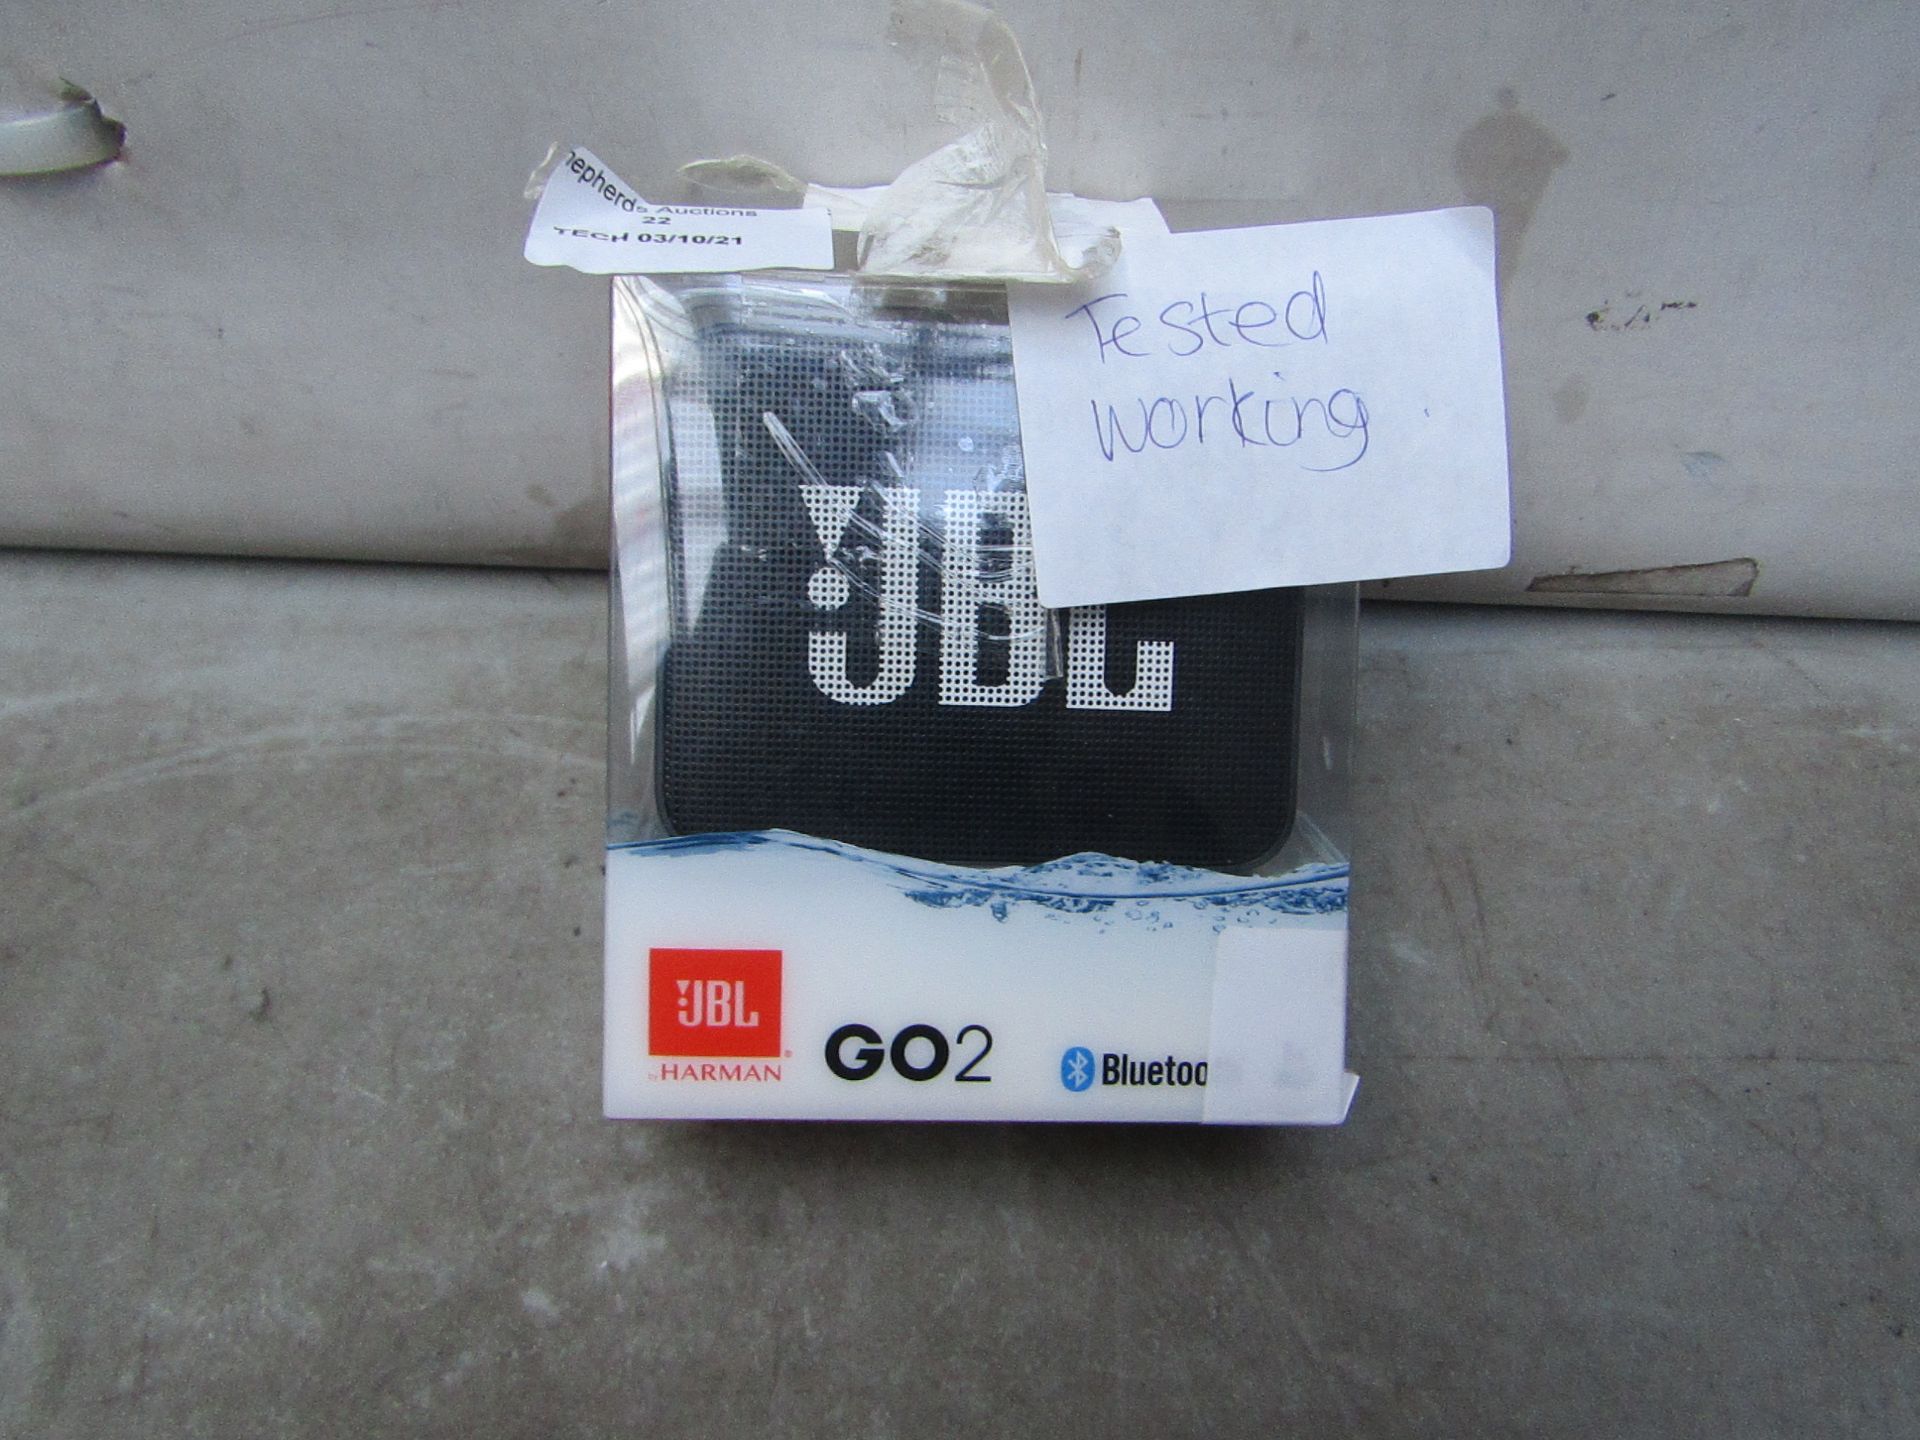 JBL by Harman Go2 Bluetooth Speaker - Untested as Needs Charging - Boxed - RRP £35